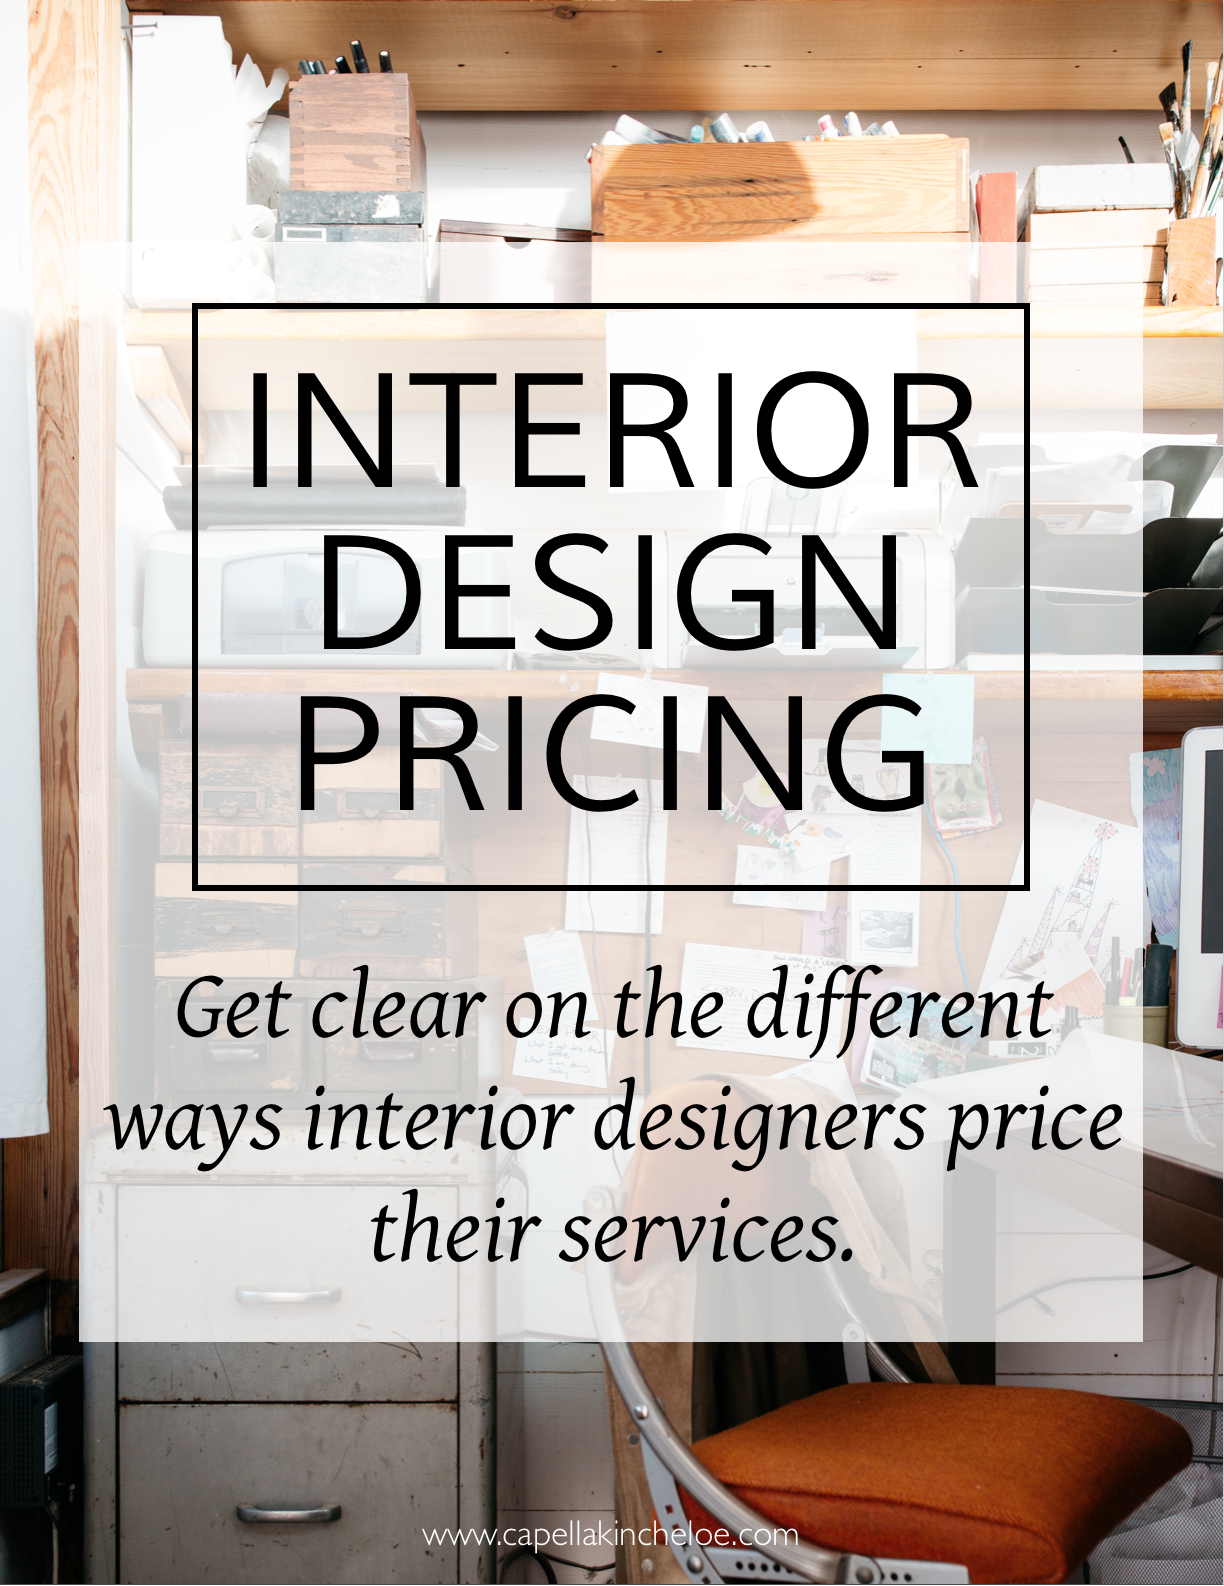 Interior Design Pricing Get Clear On The Different Ways Interior Designers Price Their Services 